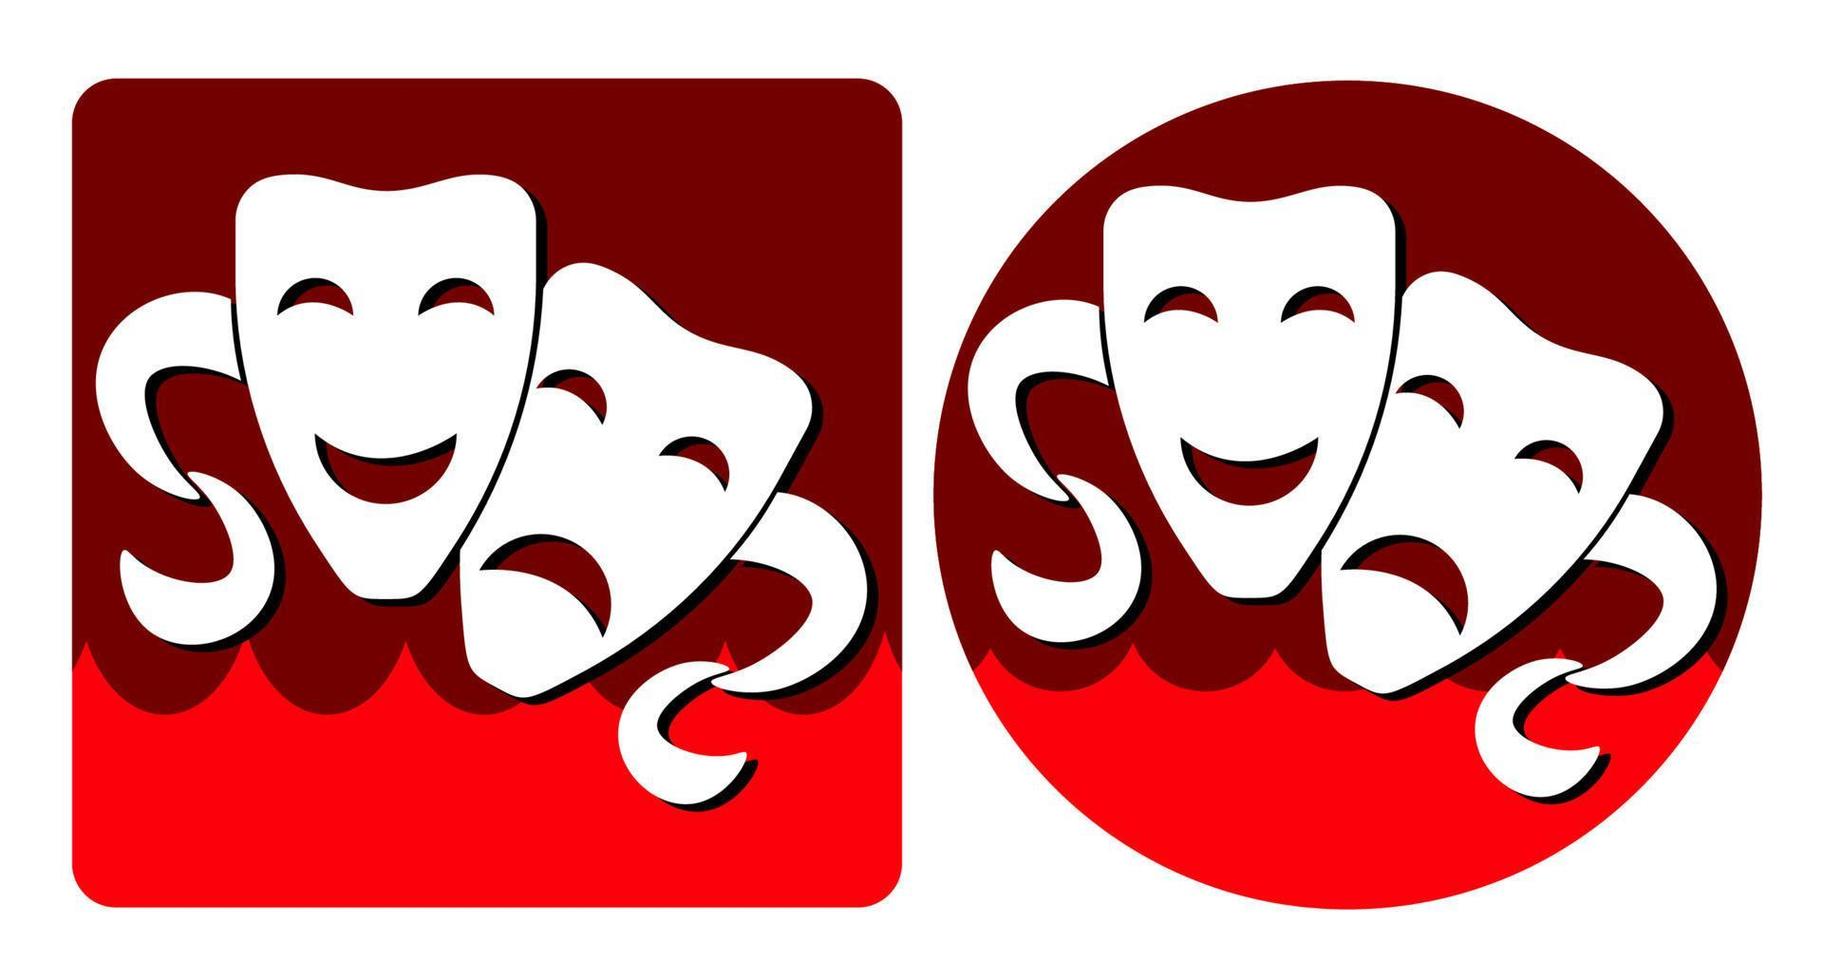 white comedy and tragic theatrical masks on a red background in the form of logos vector